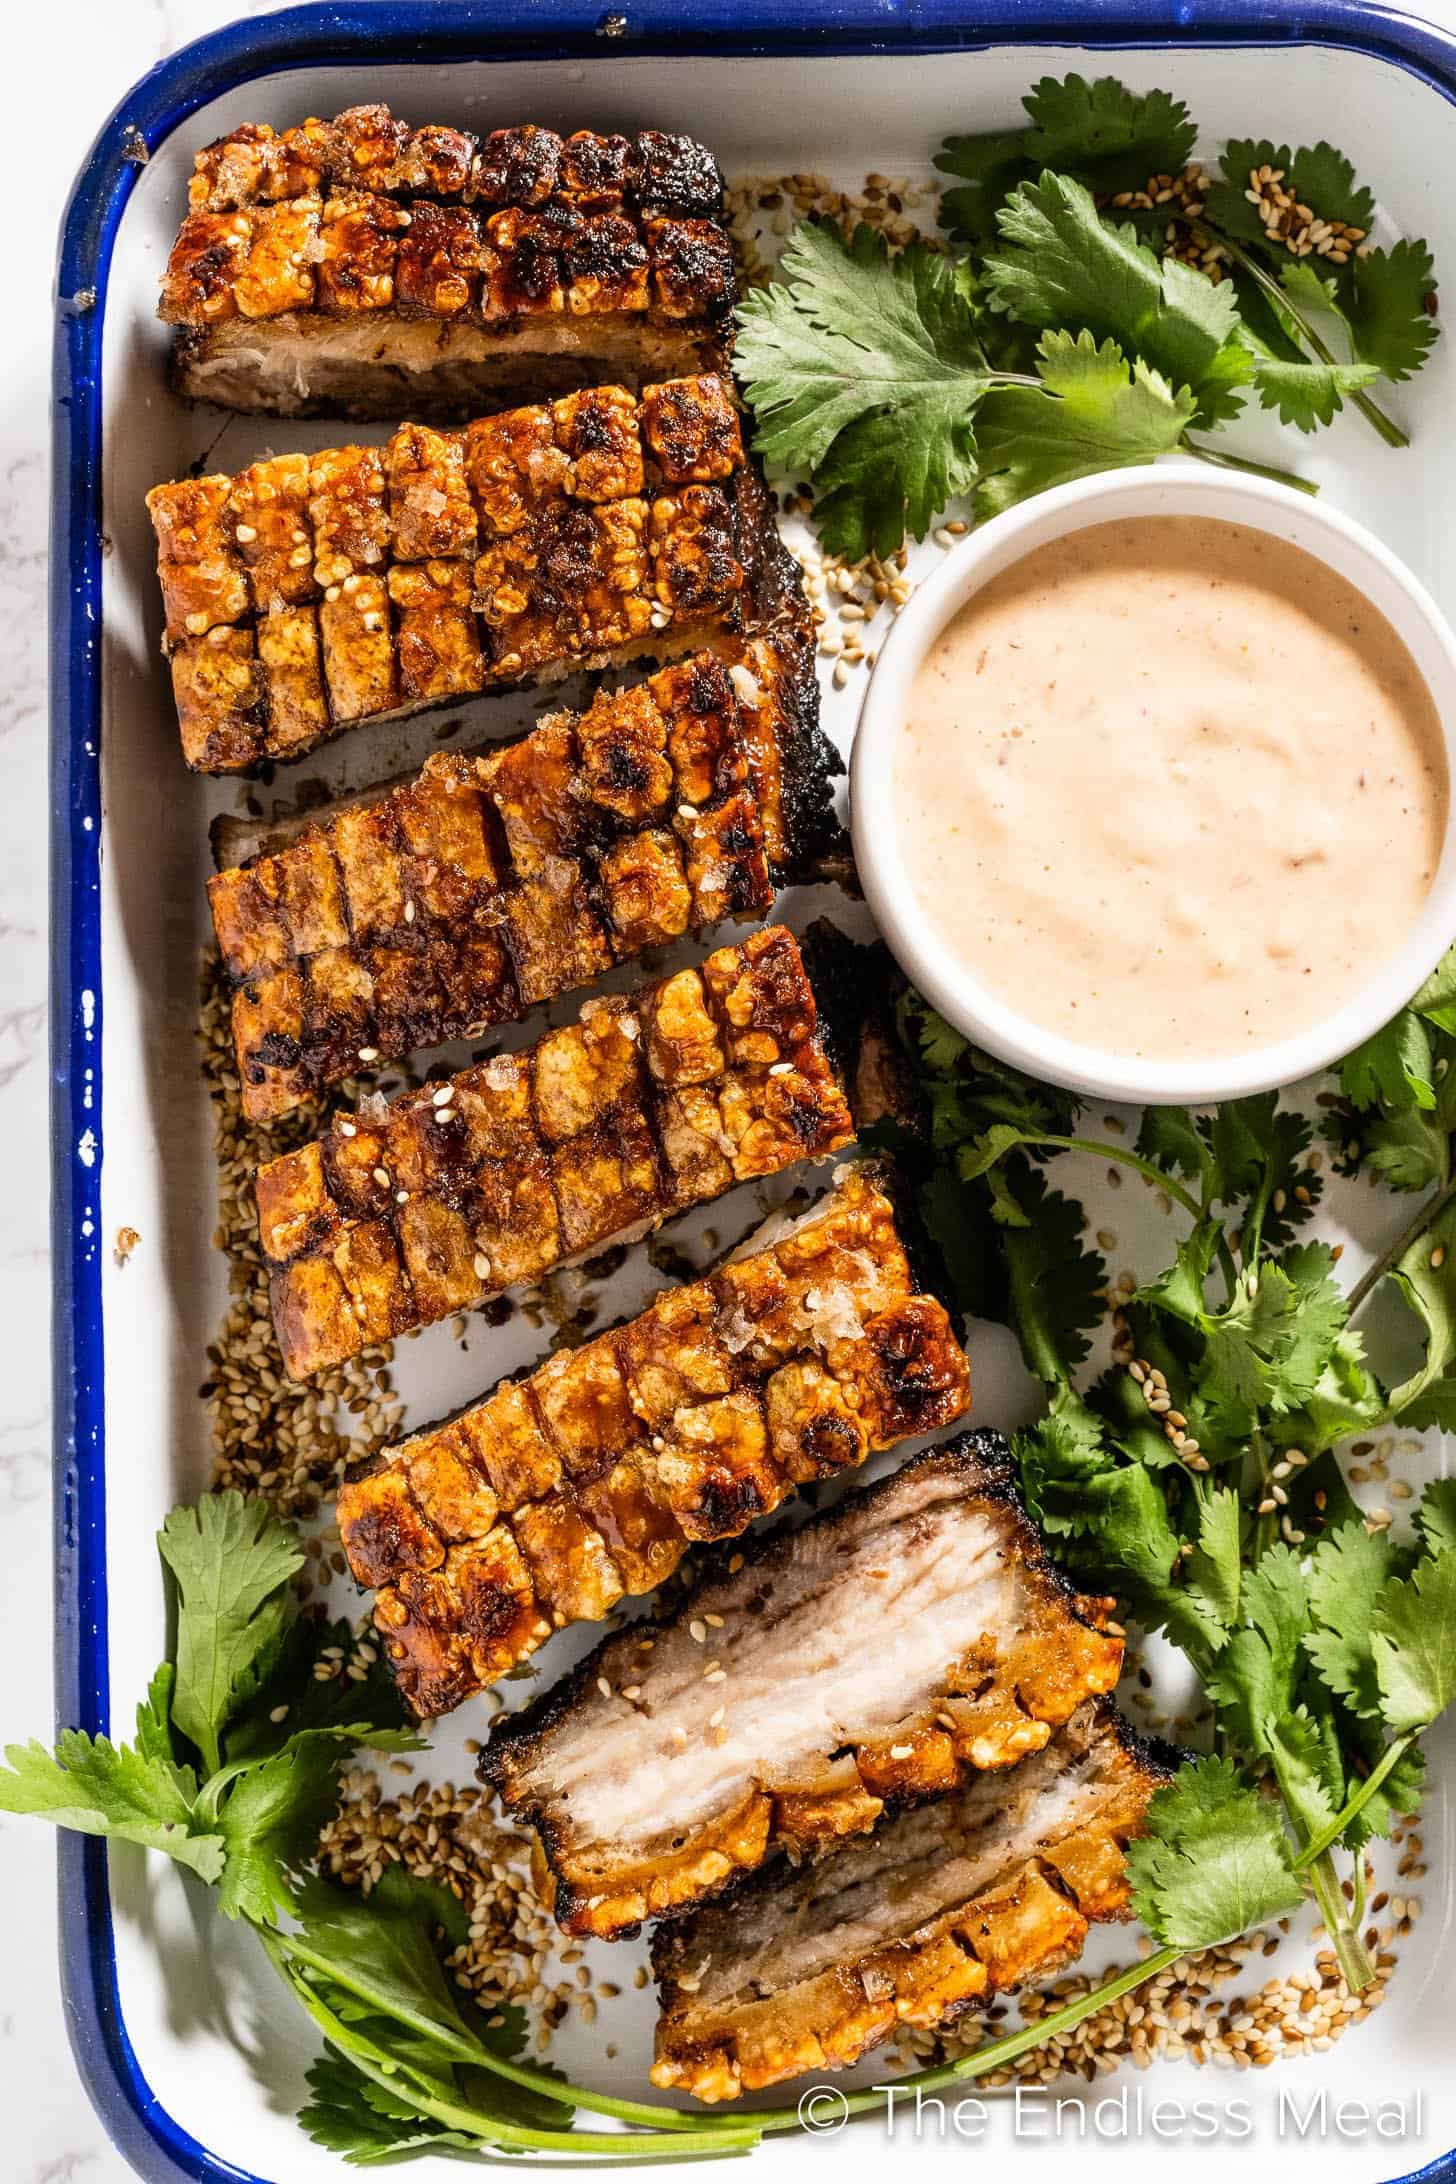 A plate of grilled ribs with a pork belly dipping sauce.